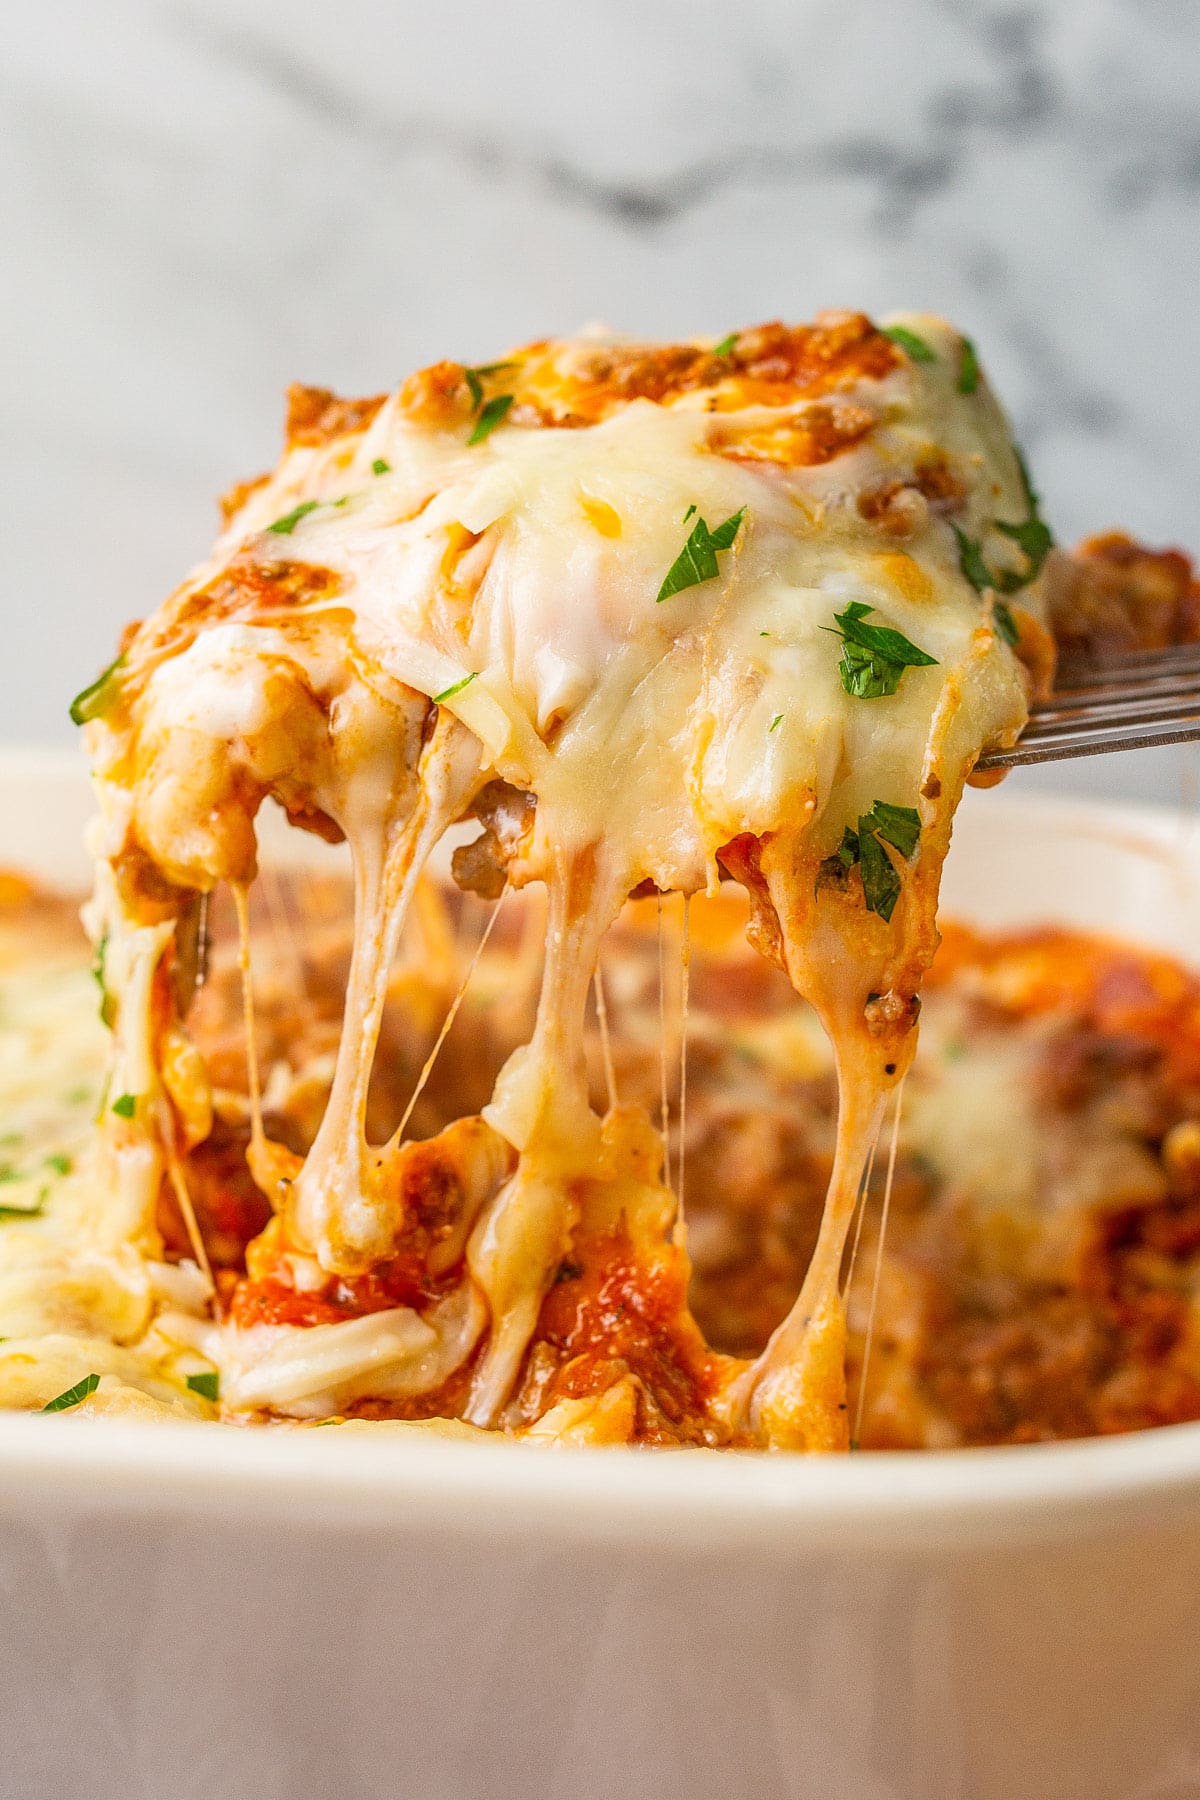 A portion of ravioli lasagna bake lifted from the casserole dish with lots of cheese strings.